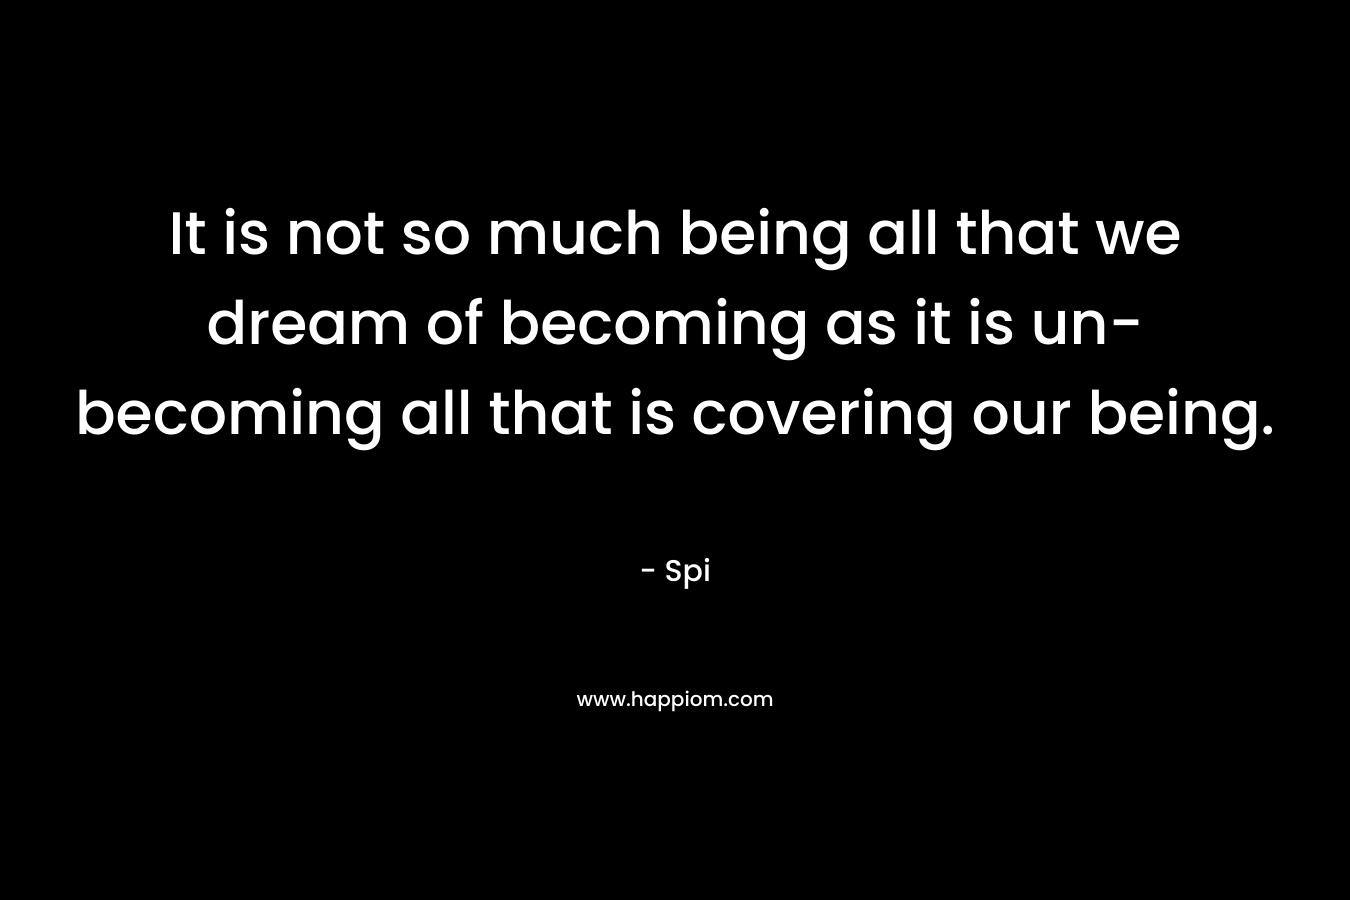 It is not so much being all that we dream of becoming as it is un-becoming all that is covering our being.